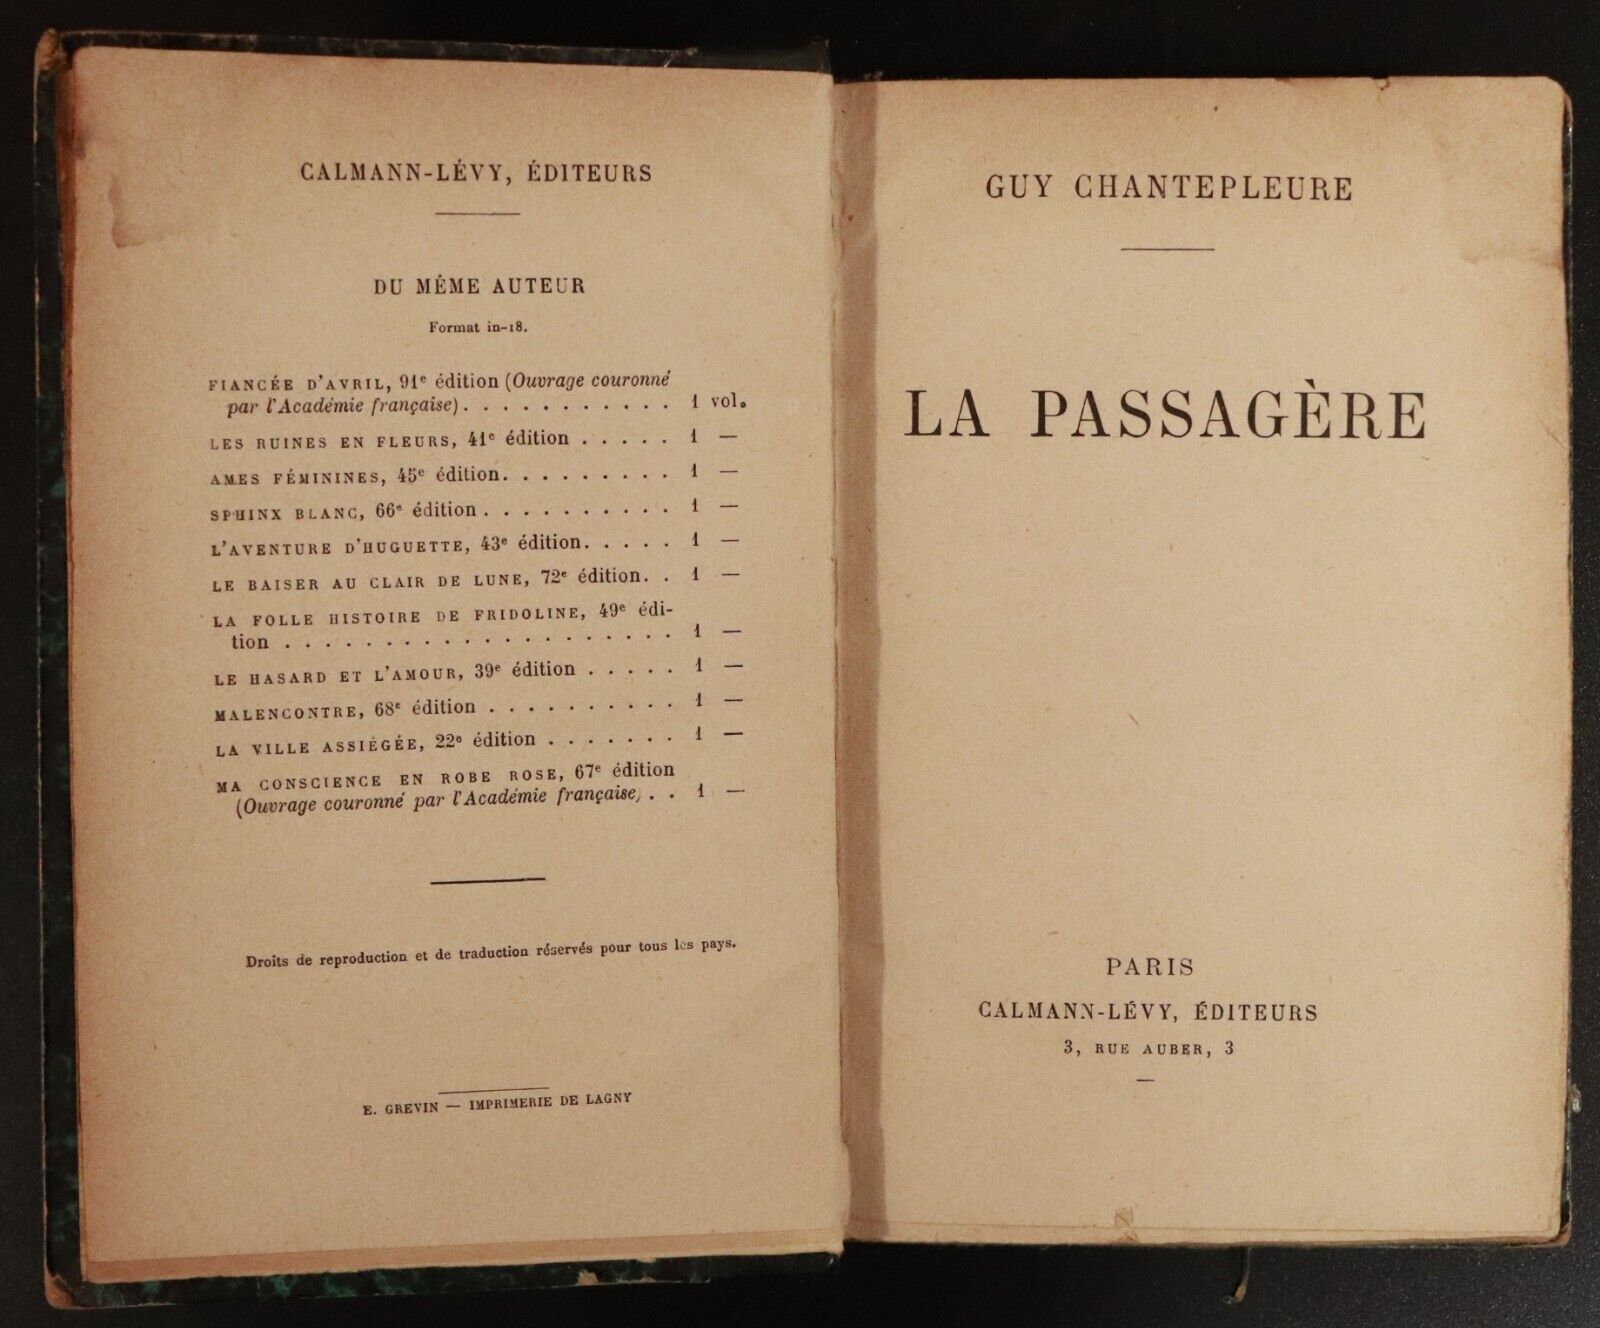 1911 La Passagere by Guy Chantepleure Antiquarian French Fiction Book - 0